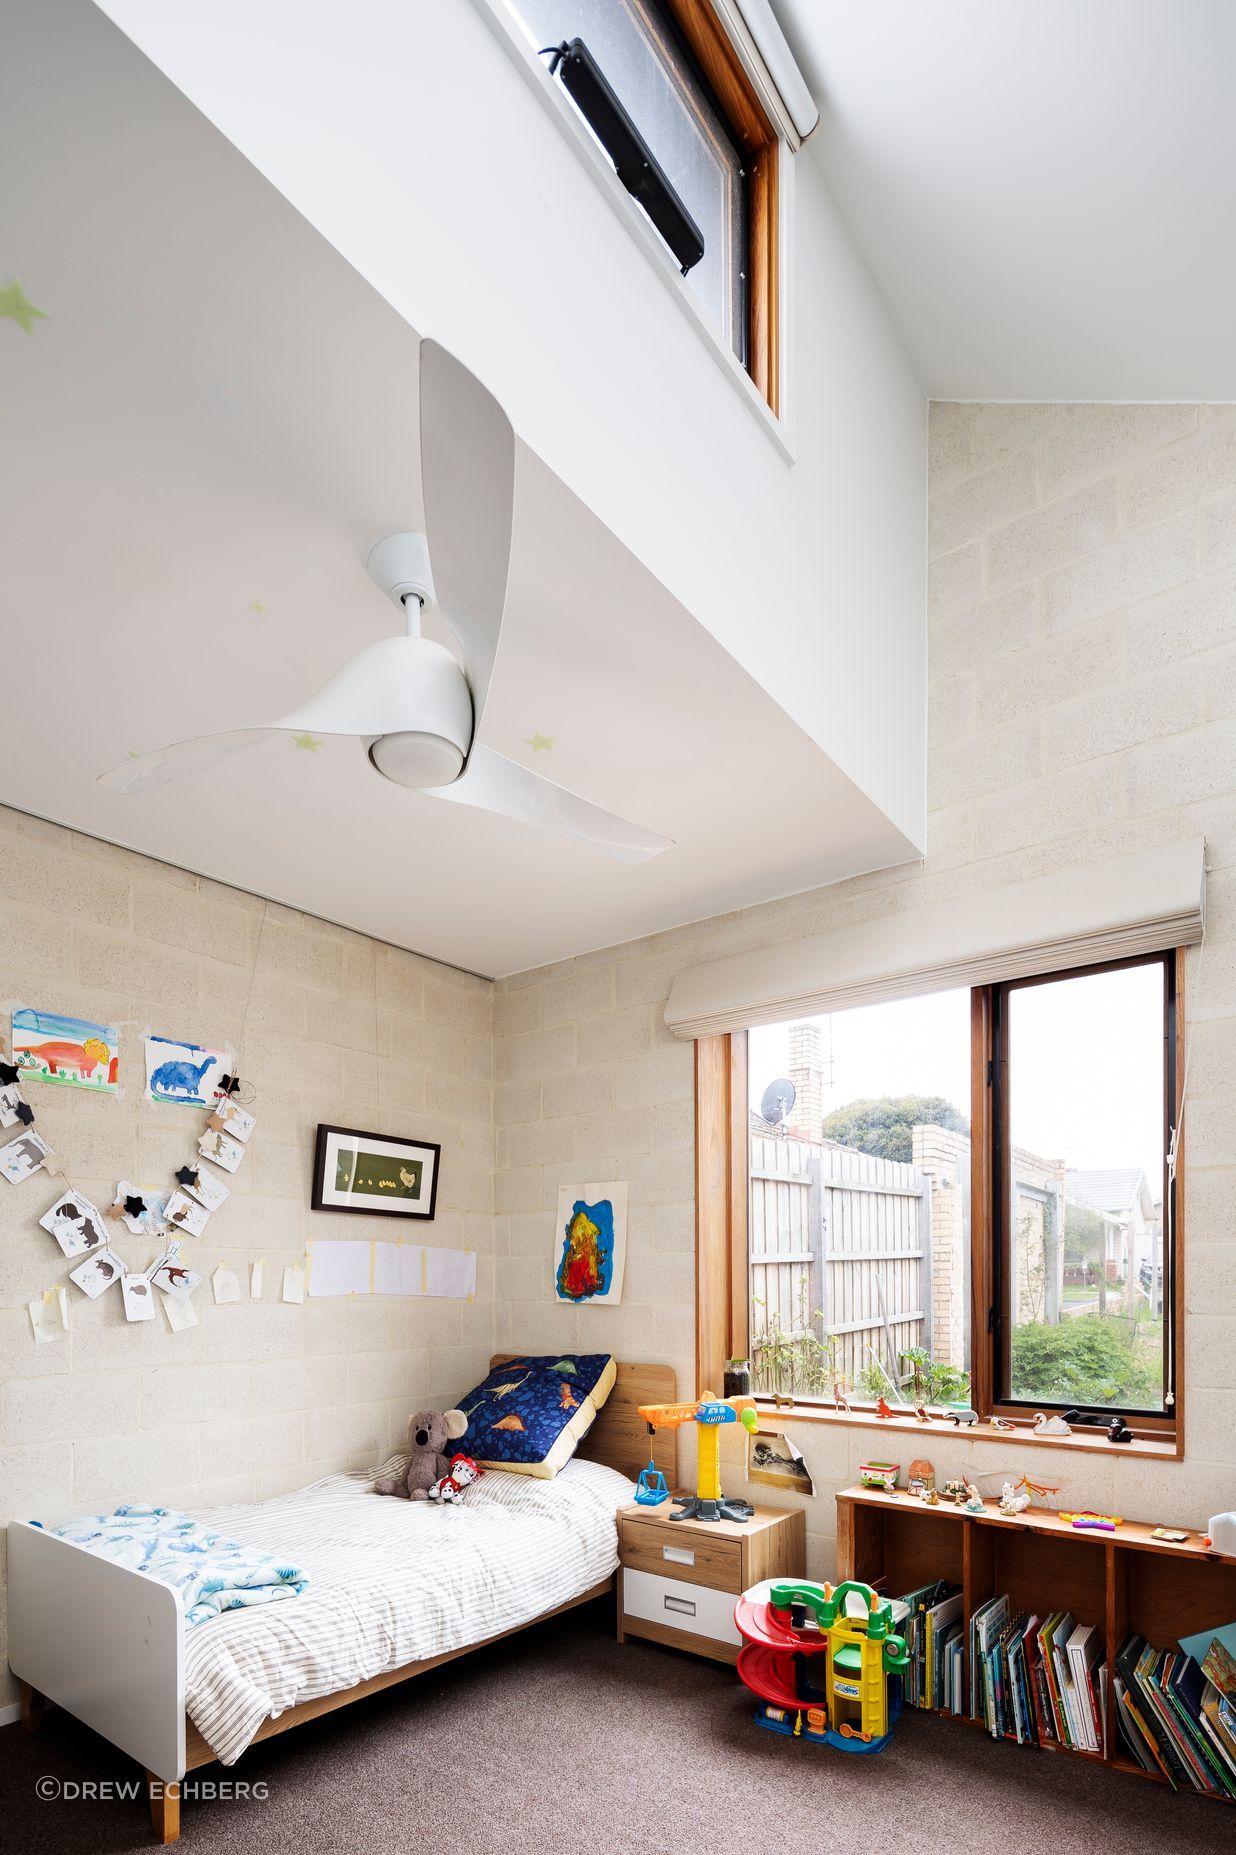 High level windows and ceiling sweep fans for good ventilation and passive solar